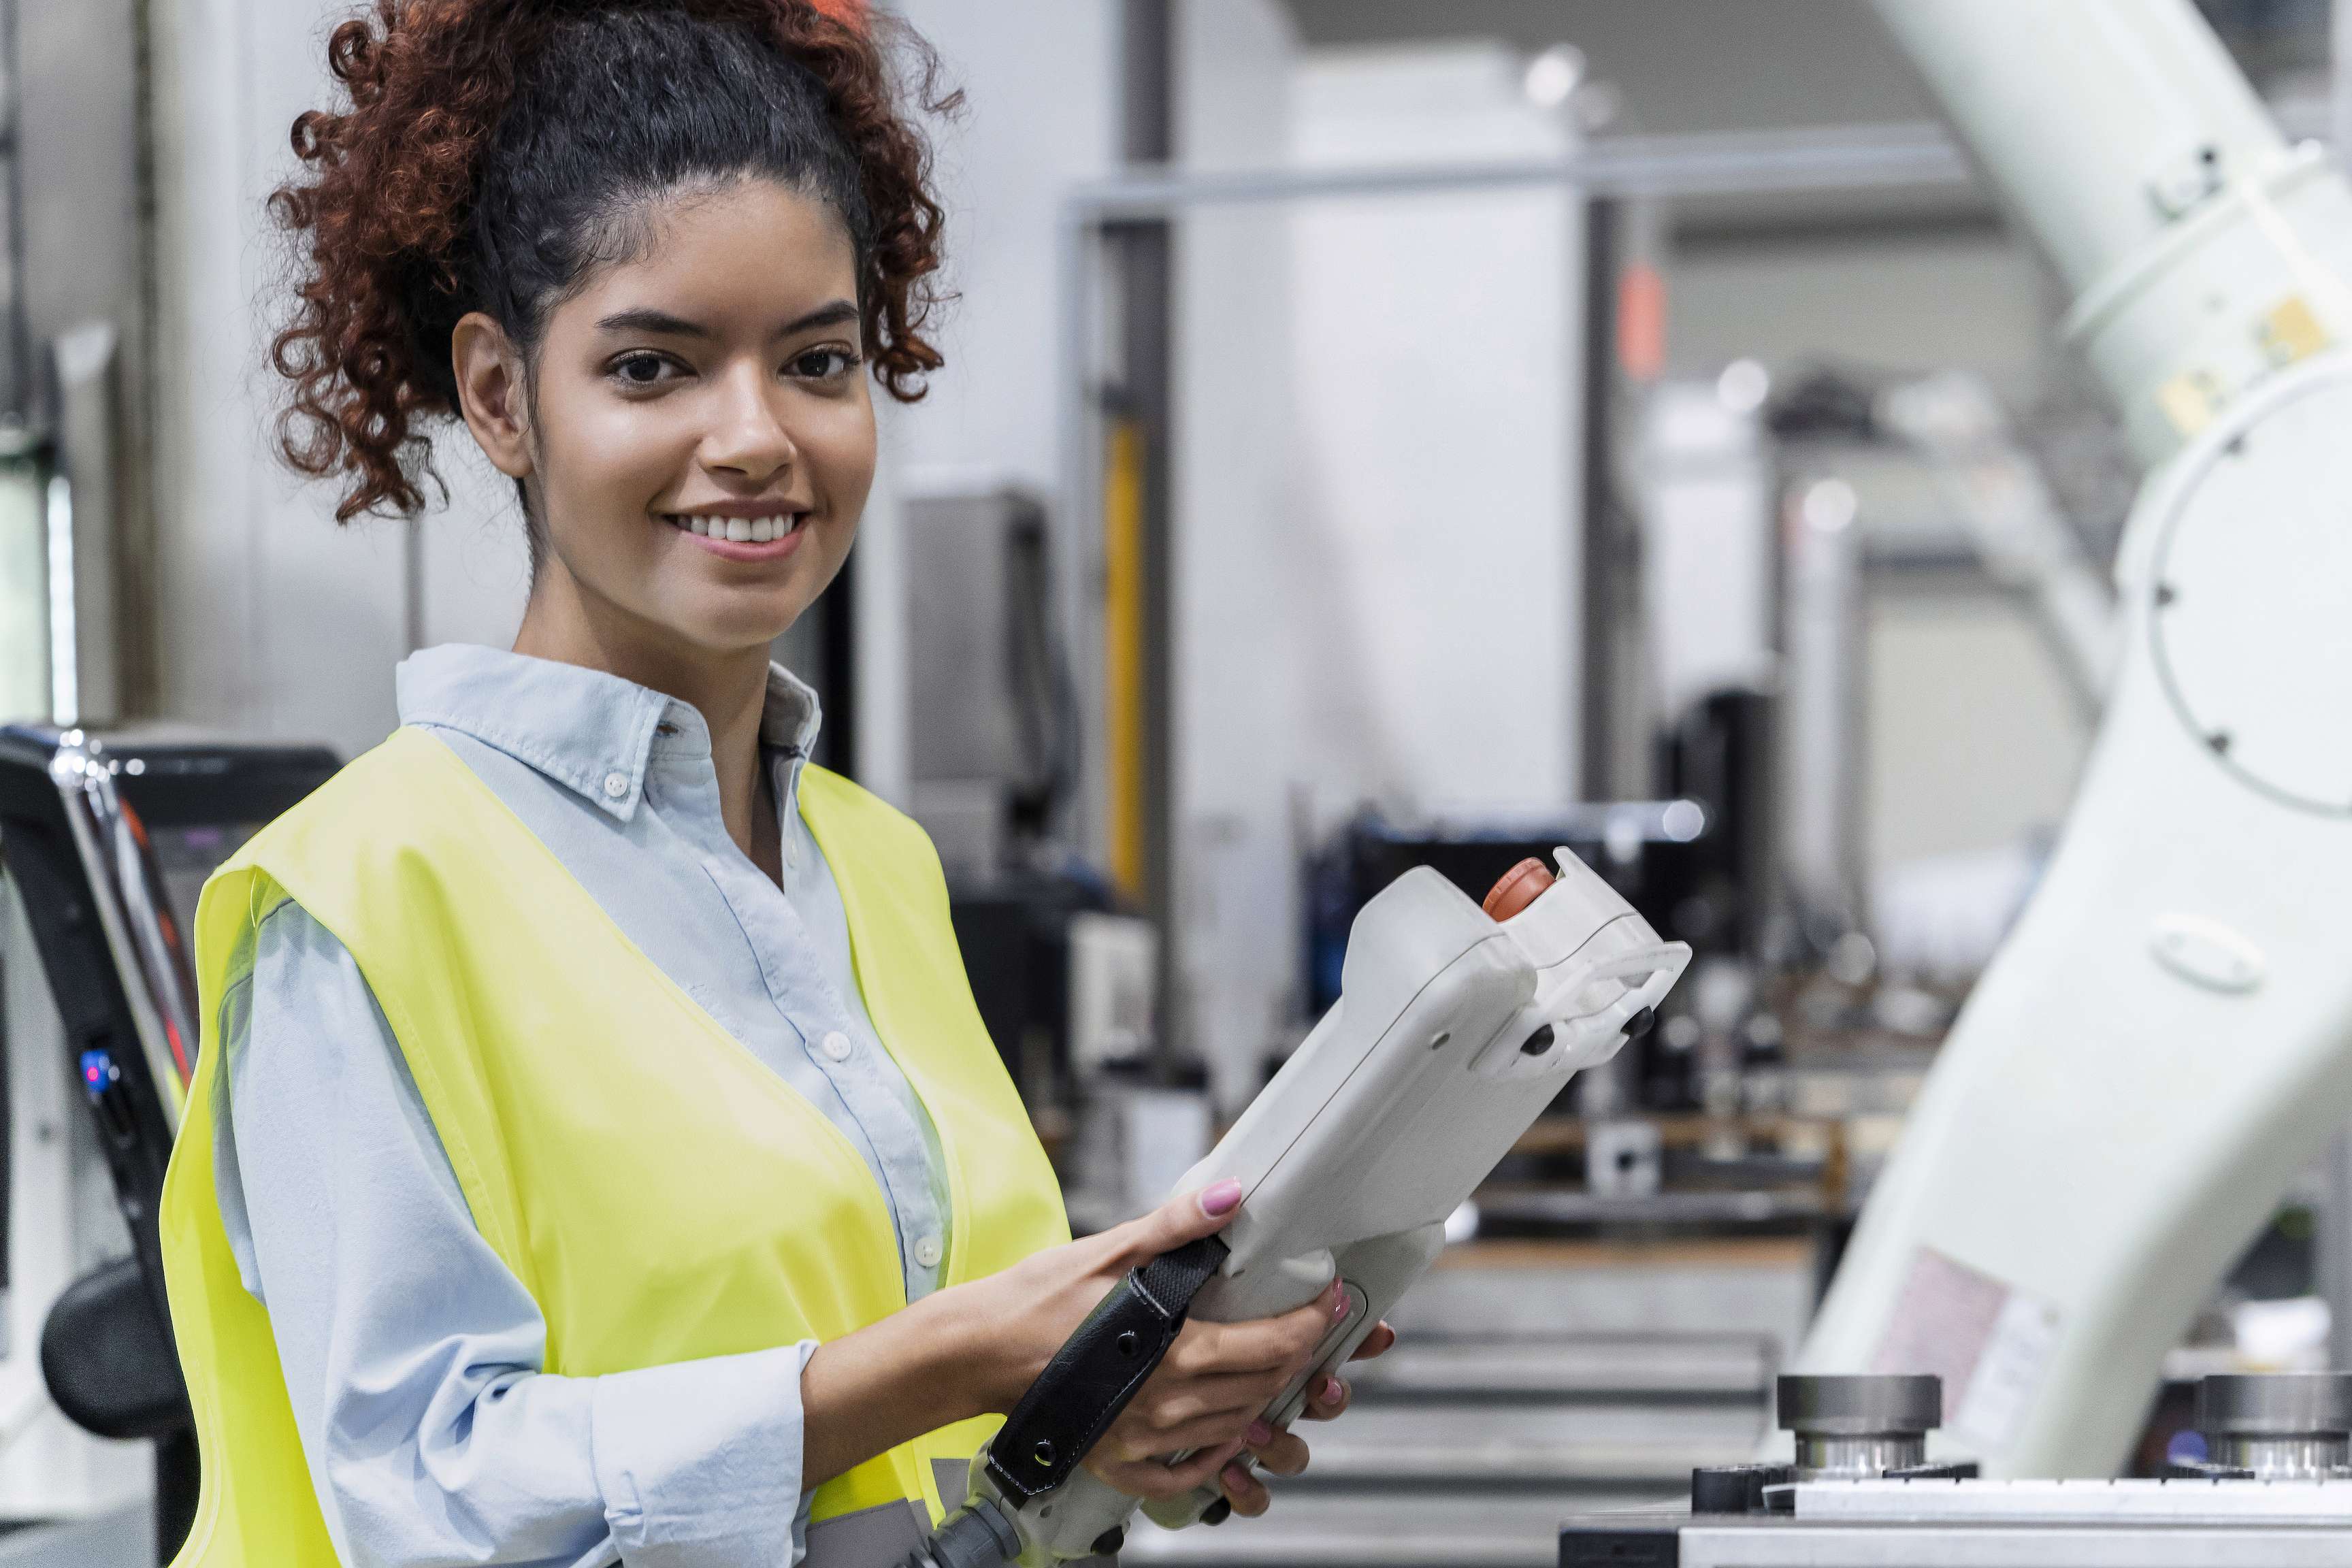 Employee smiles at camera and holds a device for a machine in her hands.